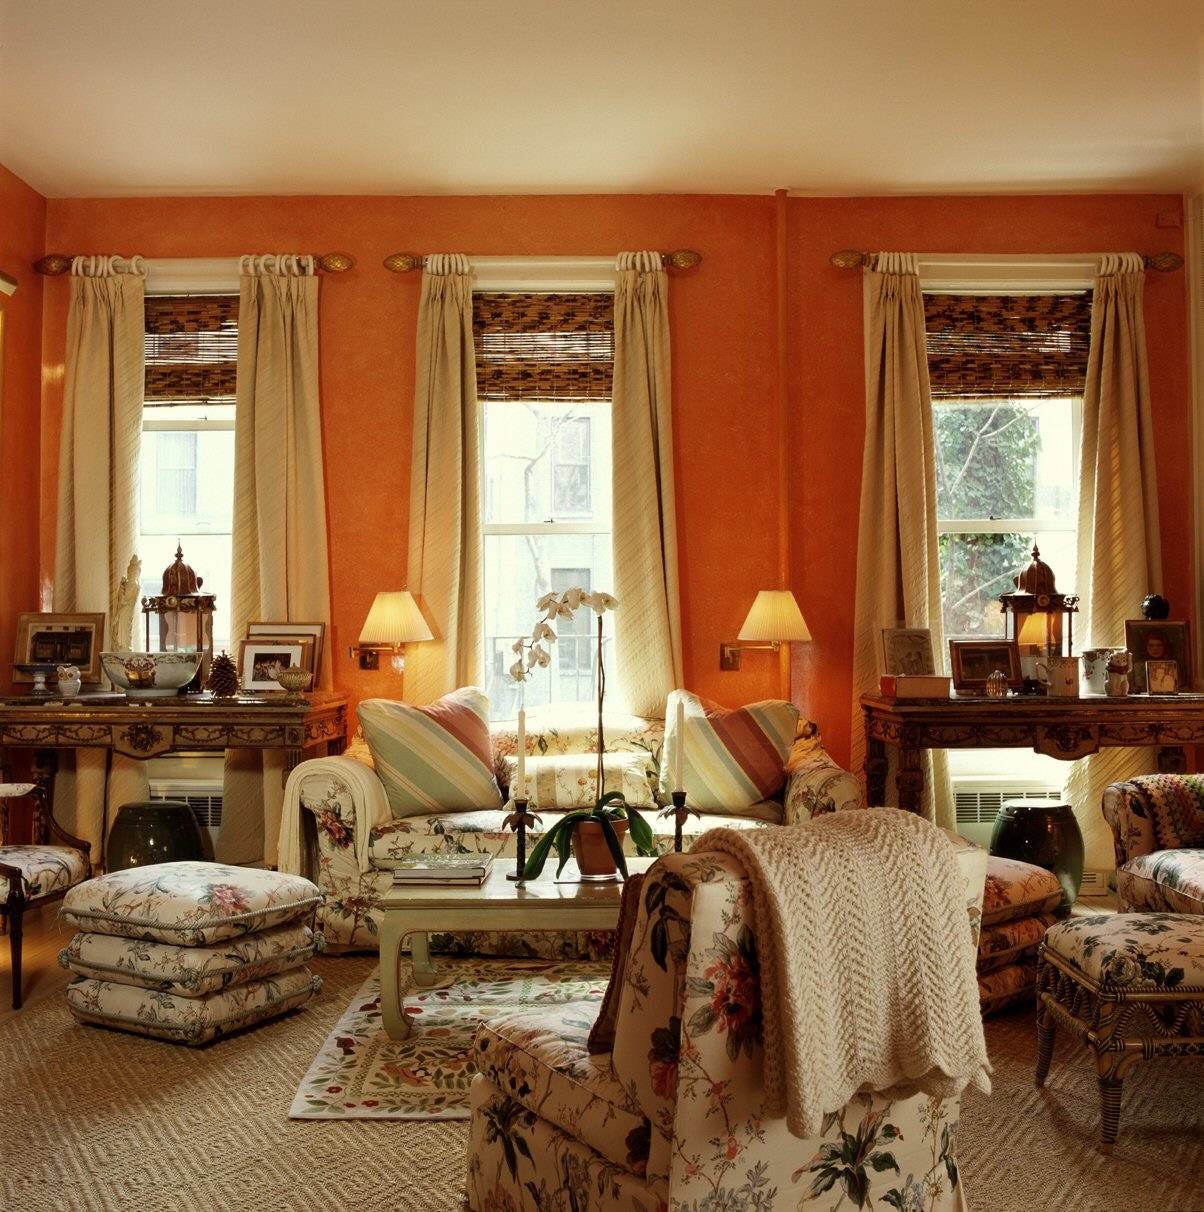 What Color Curtains Go With Orange Walls By Kelly Scott Medium